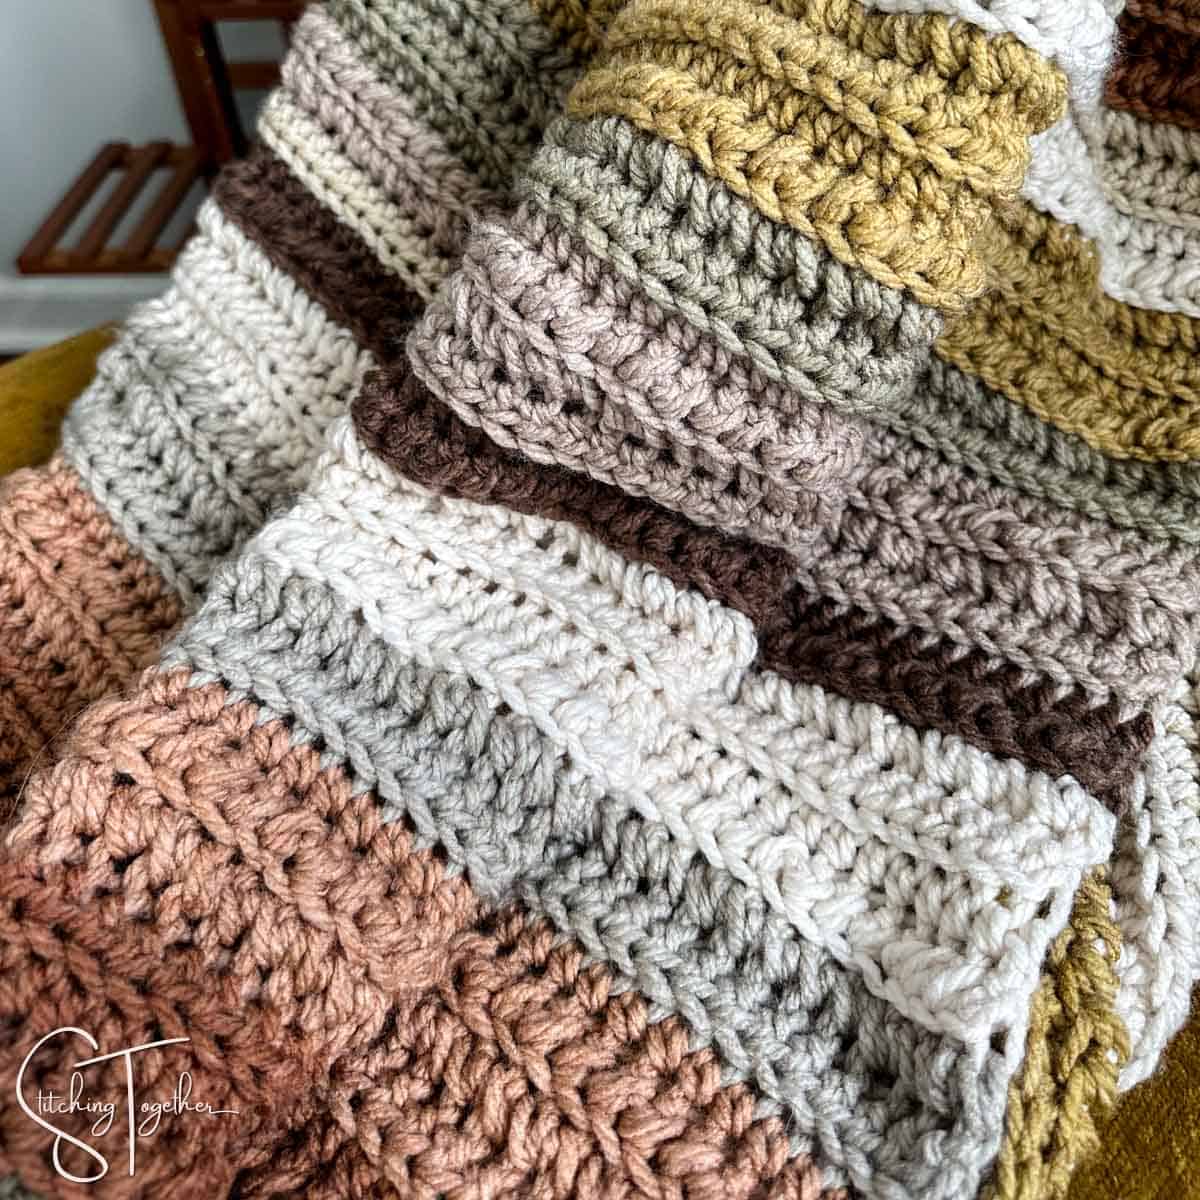 close up of textured crochet stitches in a chunky blanket